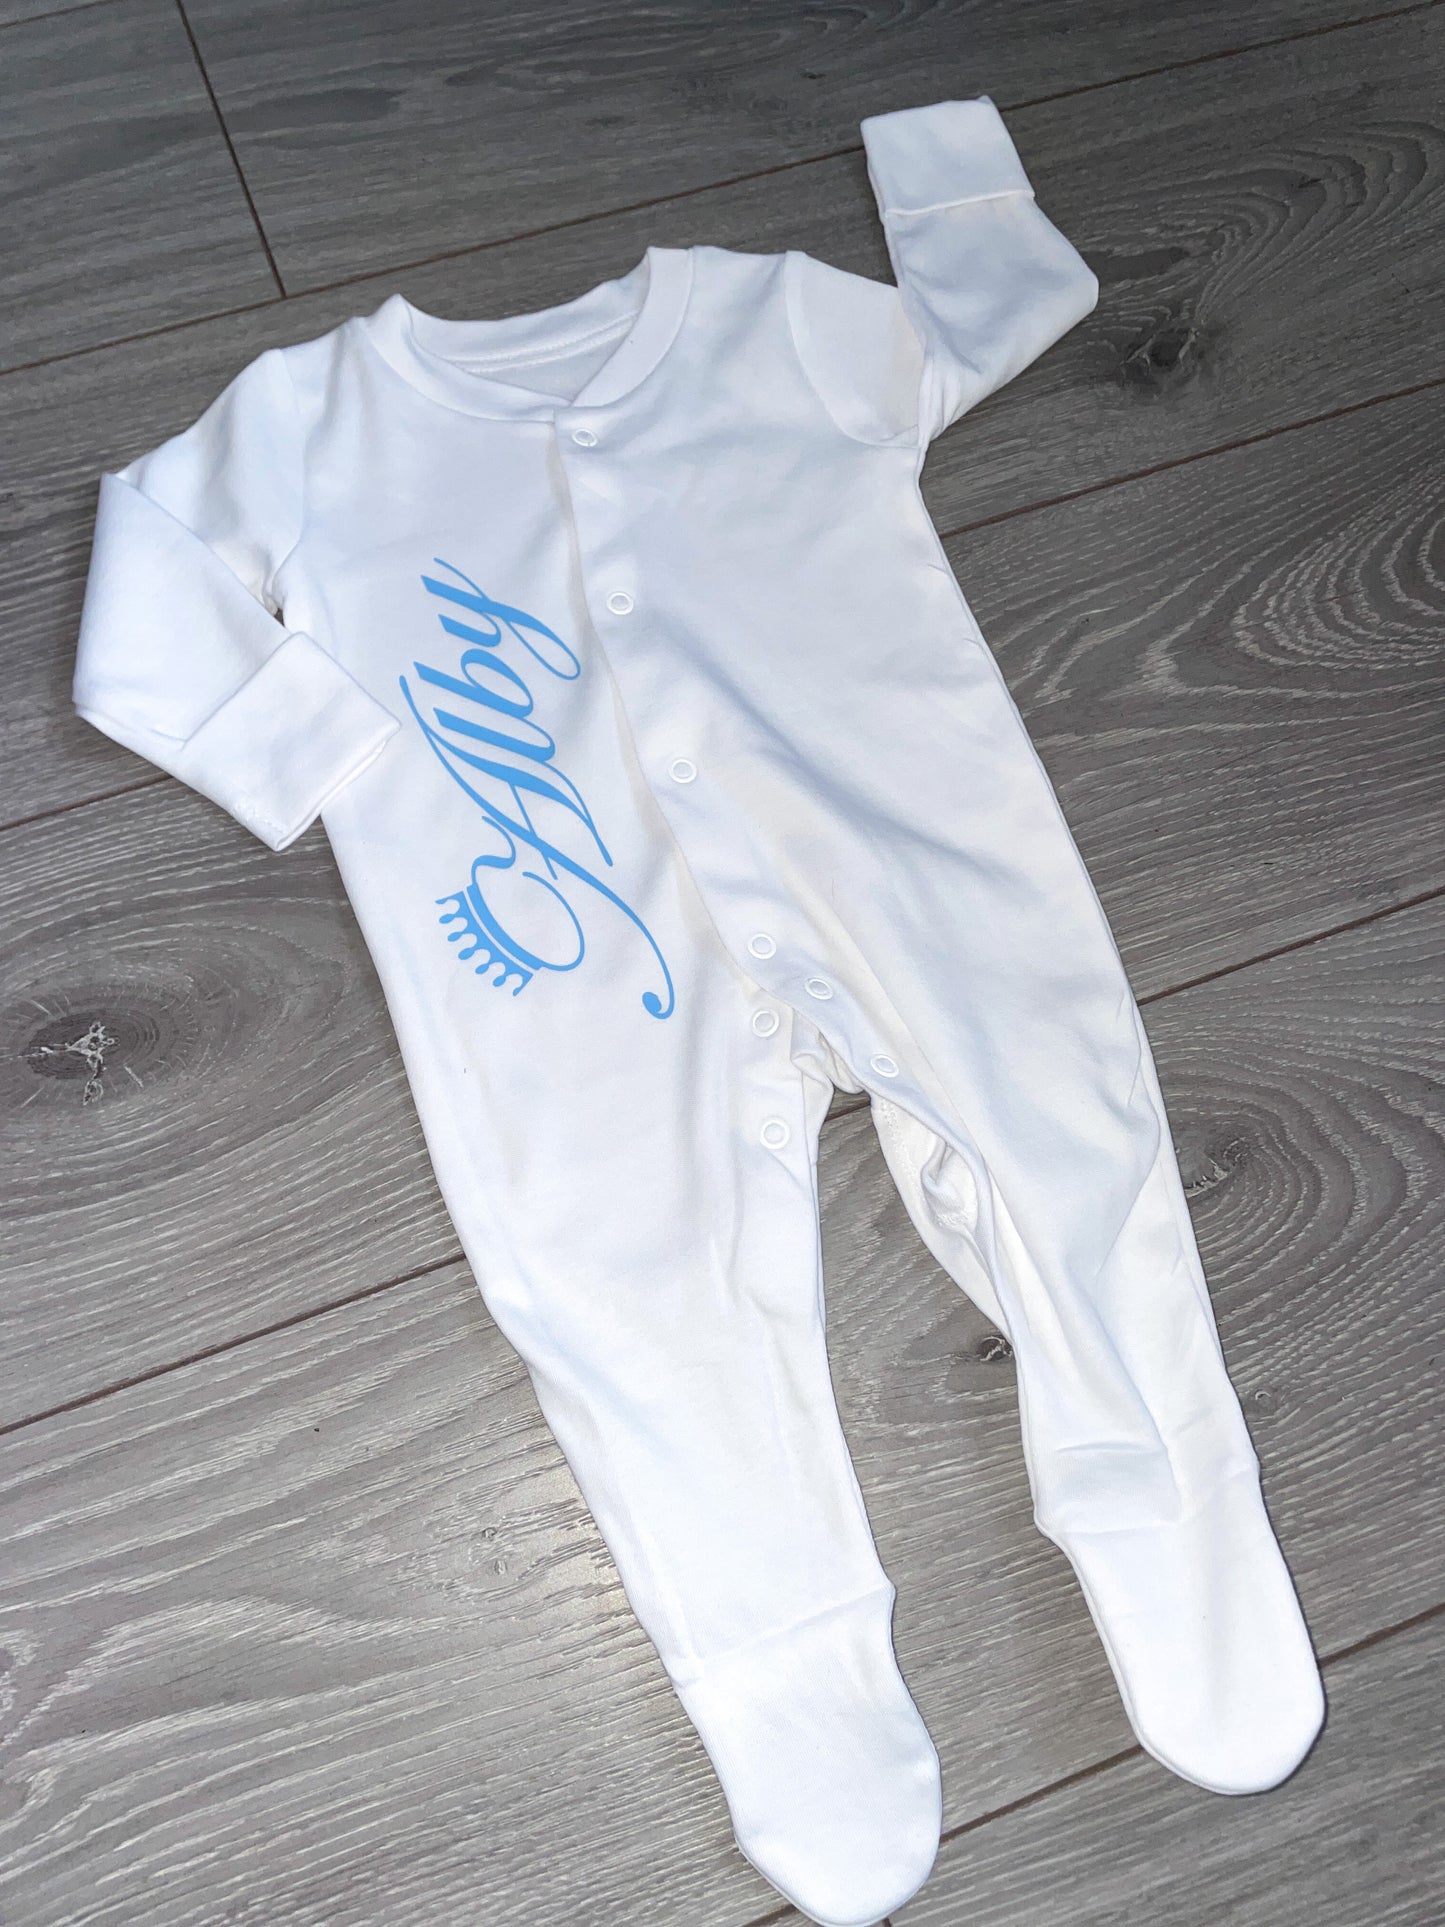 Personalised Side Name Babygrow Sleepsuit Romper - New Baby Gift - 2 for £12